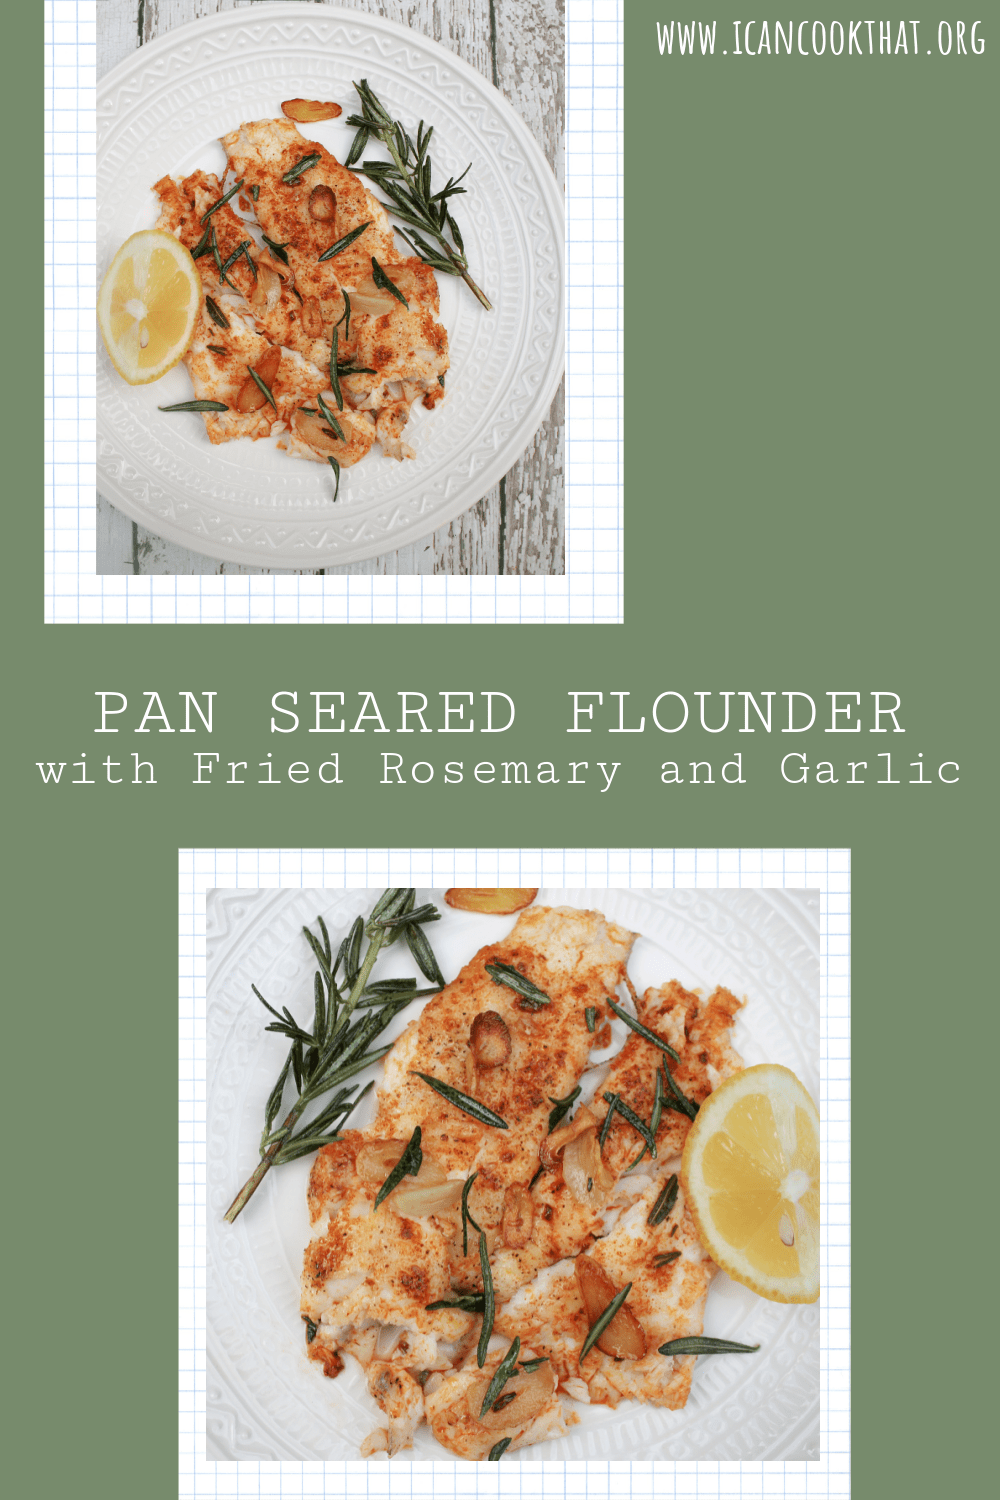 Pan Seared Flounder with Fried Rosemary and Garlic